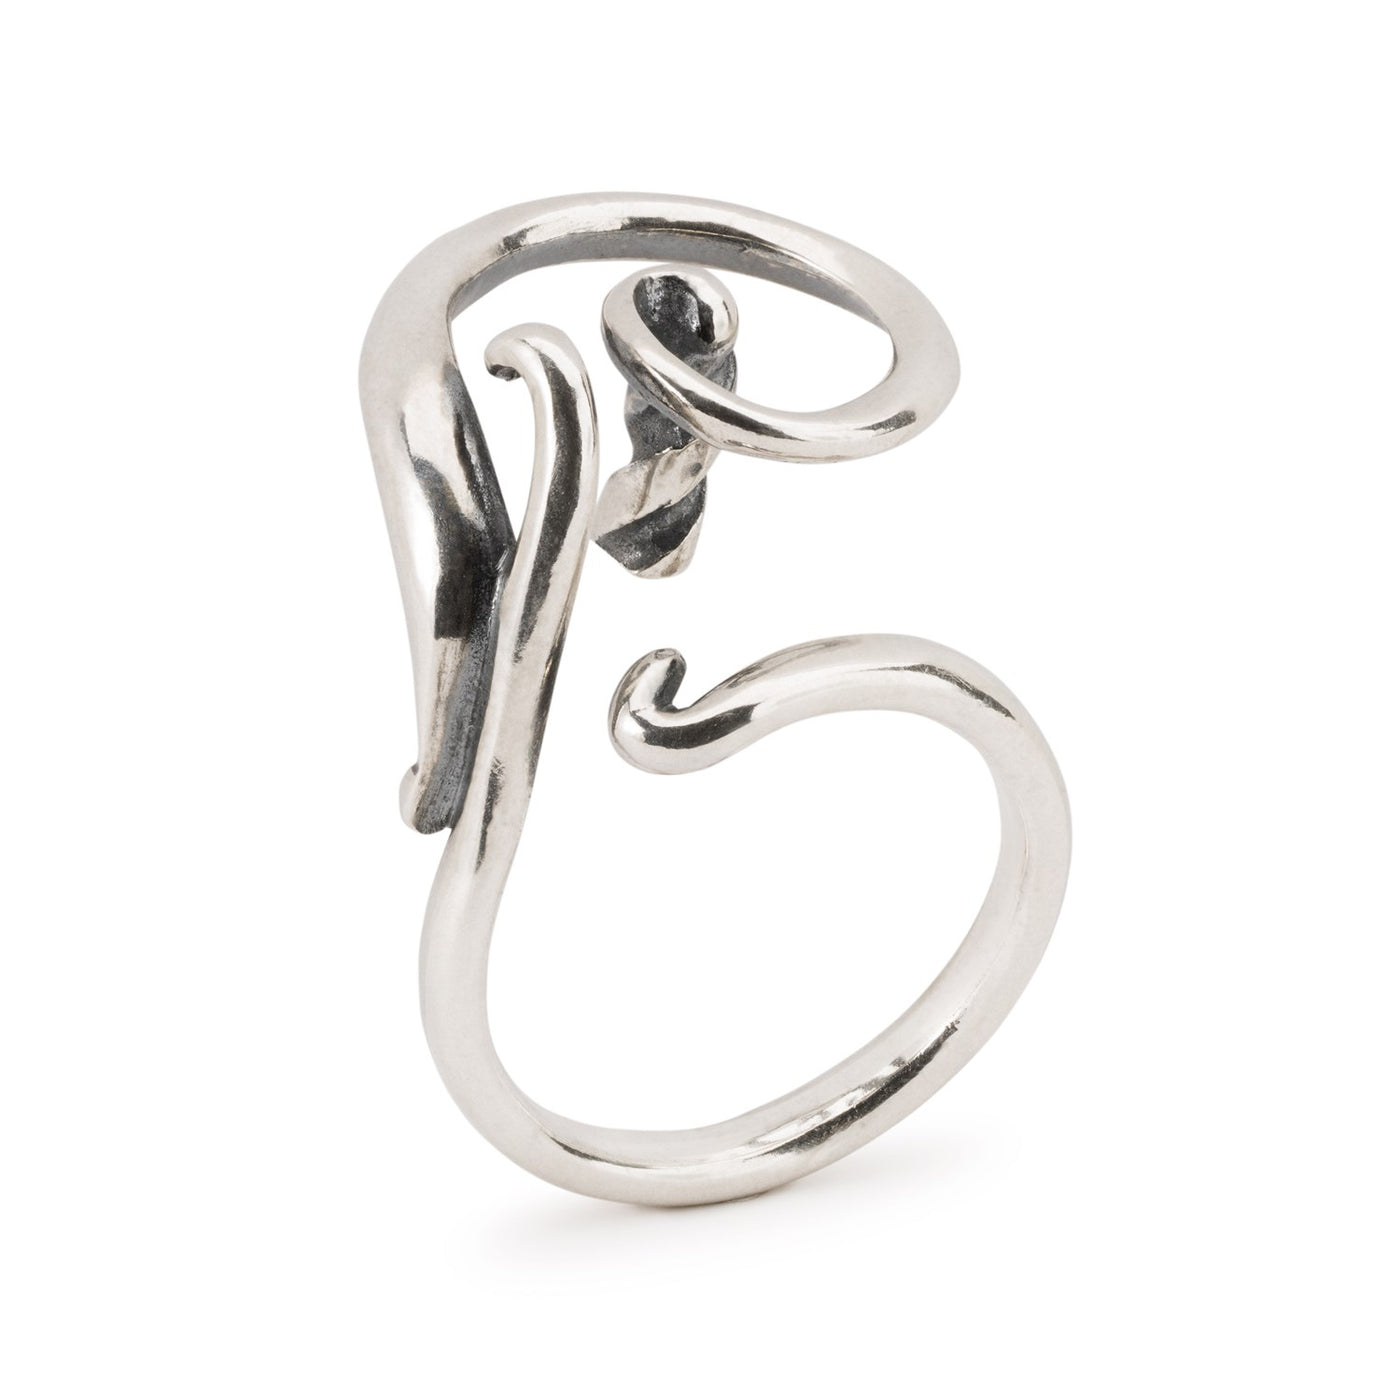 Swirling Fantasy Ring, featuring a unique, swirling design made of 925 sterling silver that allows to add a bead of your choice to the ring. 